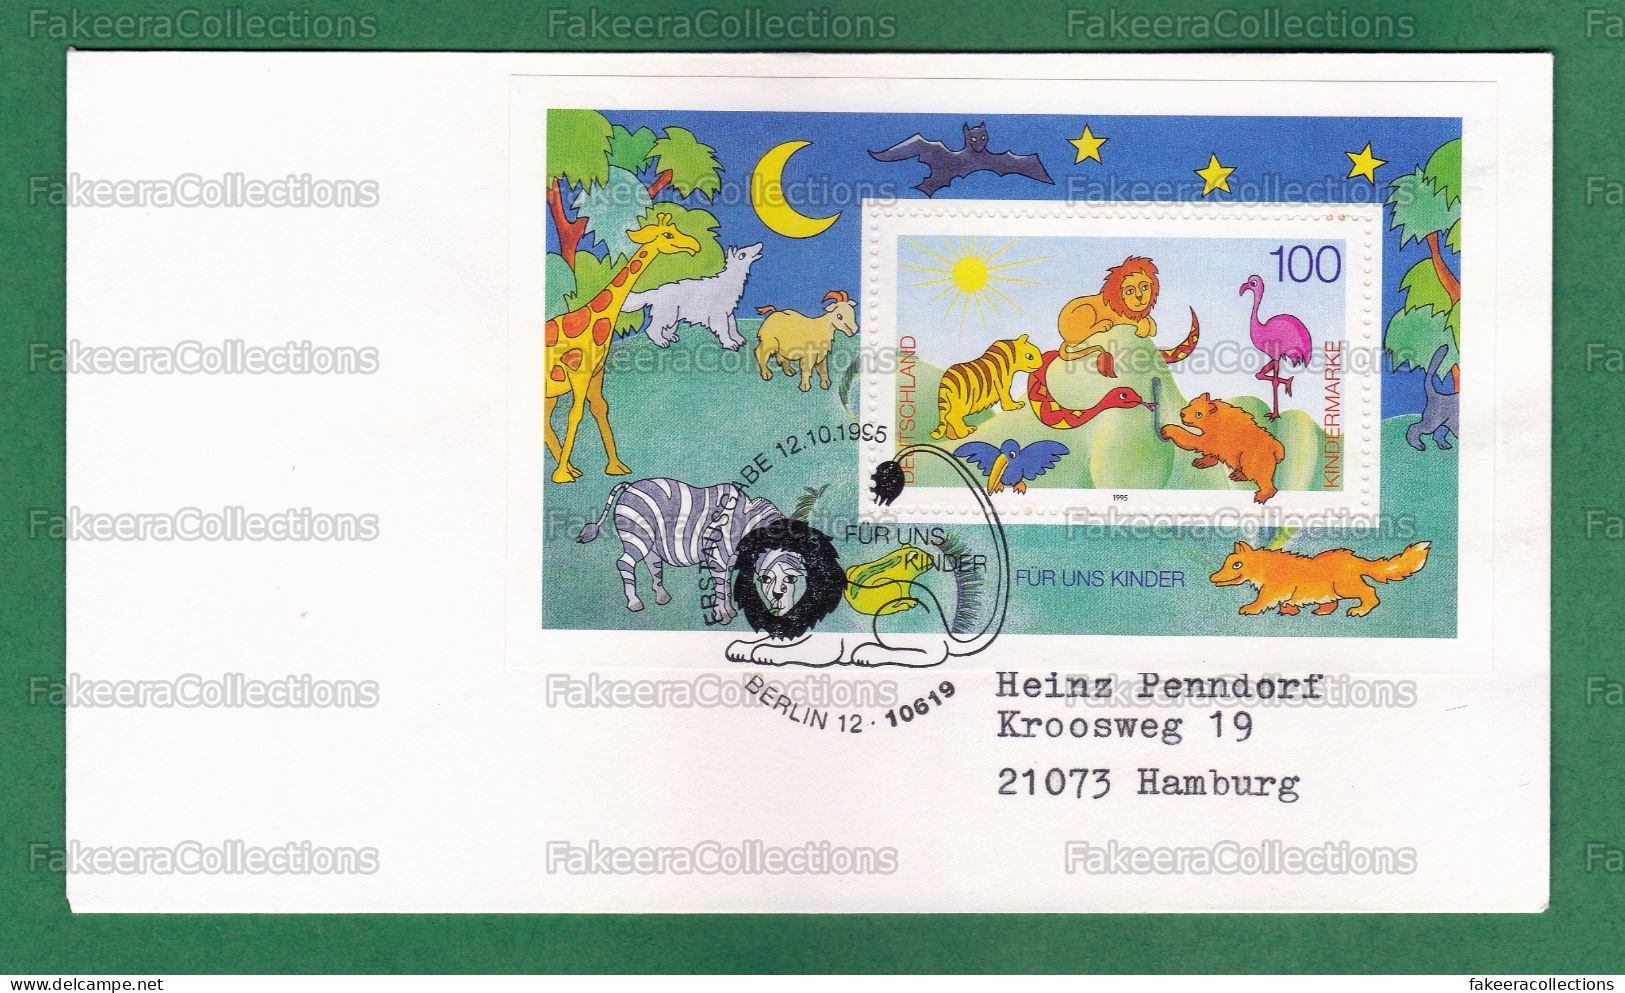 GERMANY 1995 - FOR THE CHILDREN 1v M/S FDC - Postal Used On Date Of Issue - Animals, TIGER, LION, SNAKE, BEAR, BIRDS - Felinos